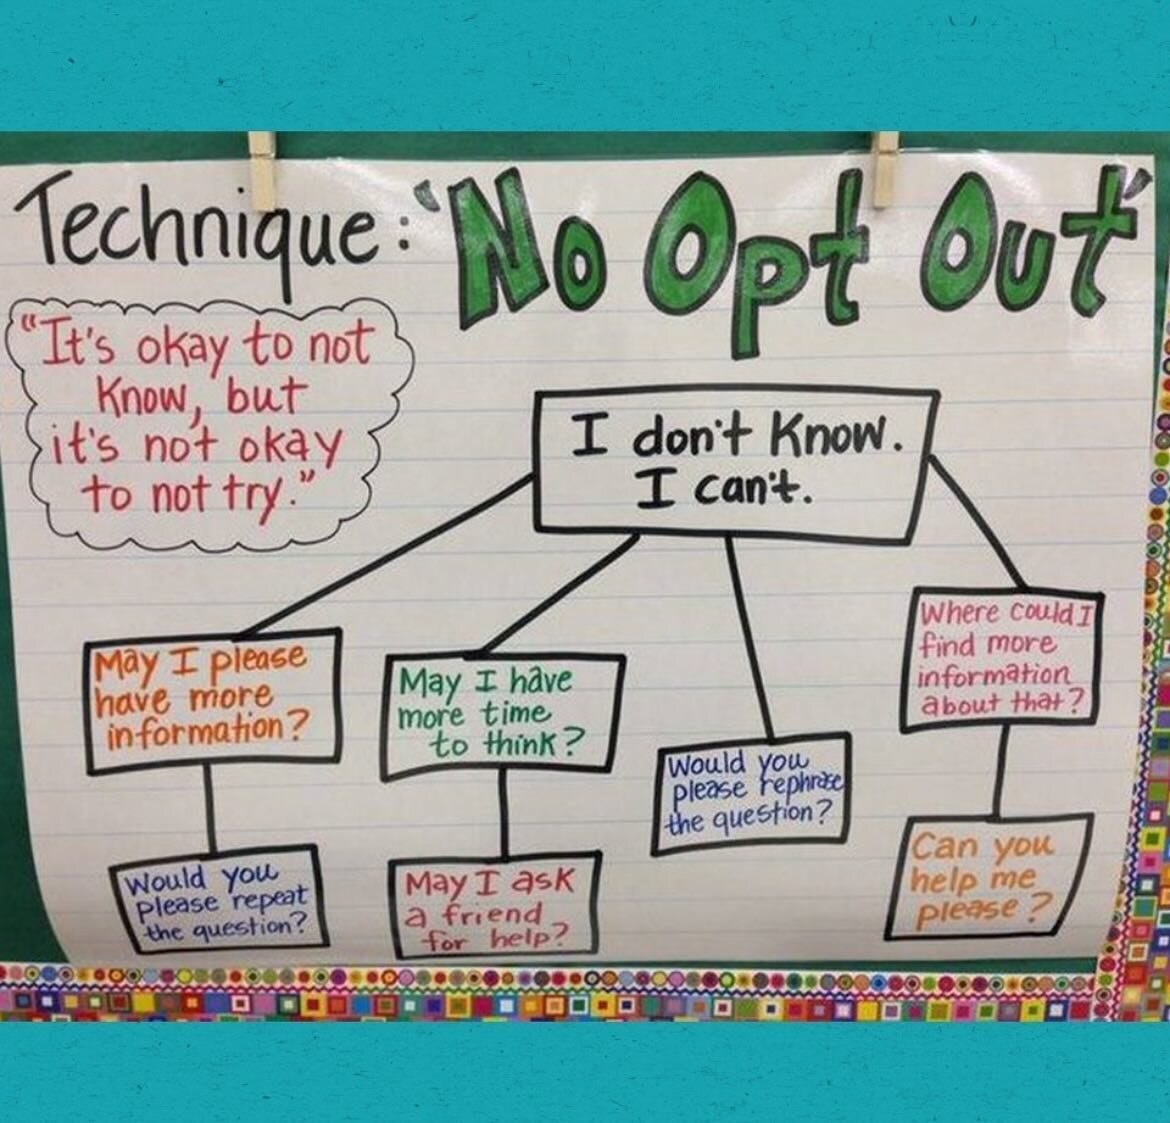 Teachers, want to increase student participation but want to make it not-scary? Share a set of options like @psloanjoseph did. With this flowchart in the classroom, you&rsquo;re normalizing
💚 not knowing
💜 think time
🩵 collaborating 
💙 asking for